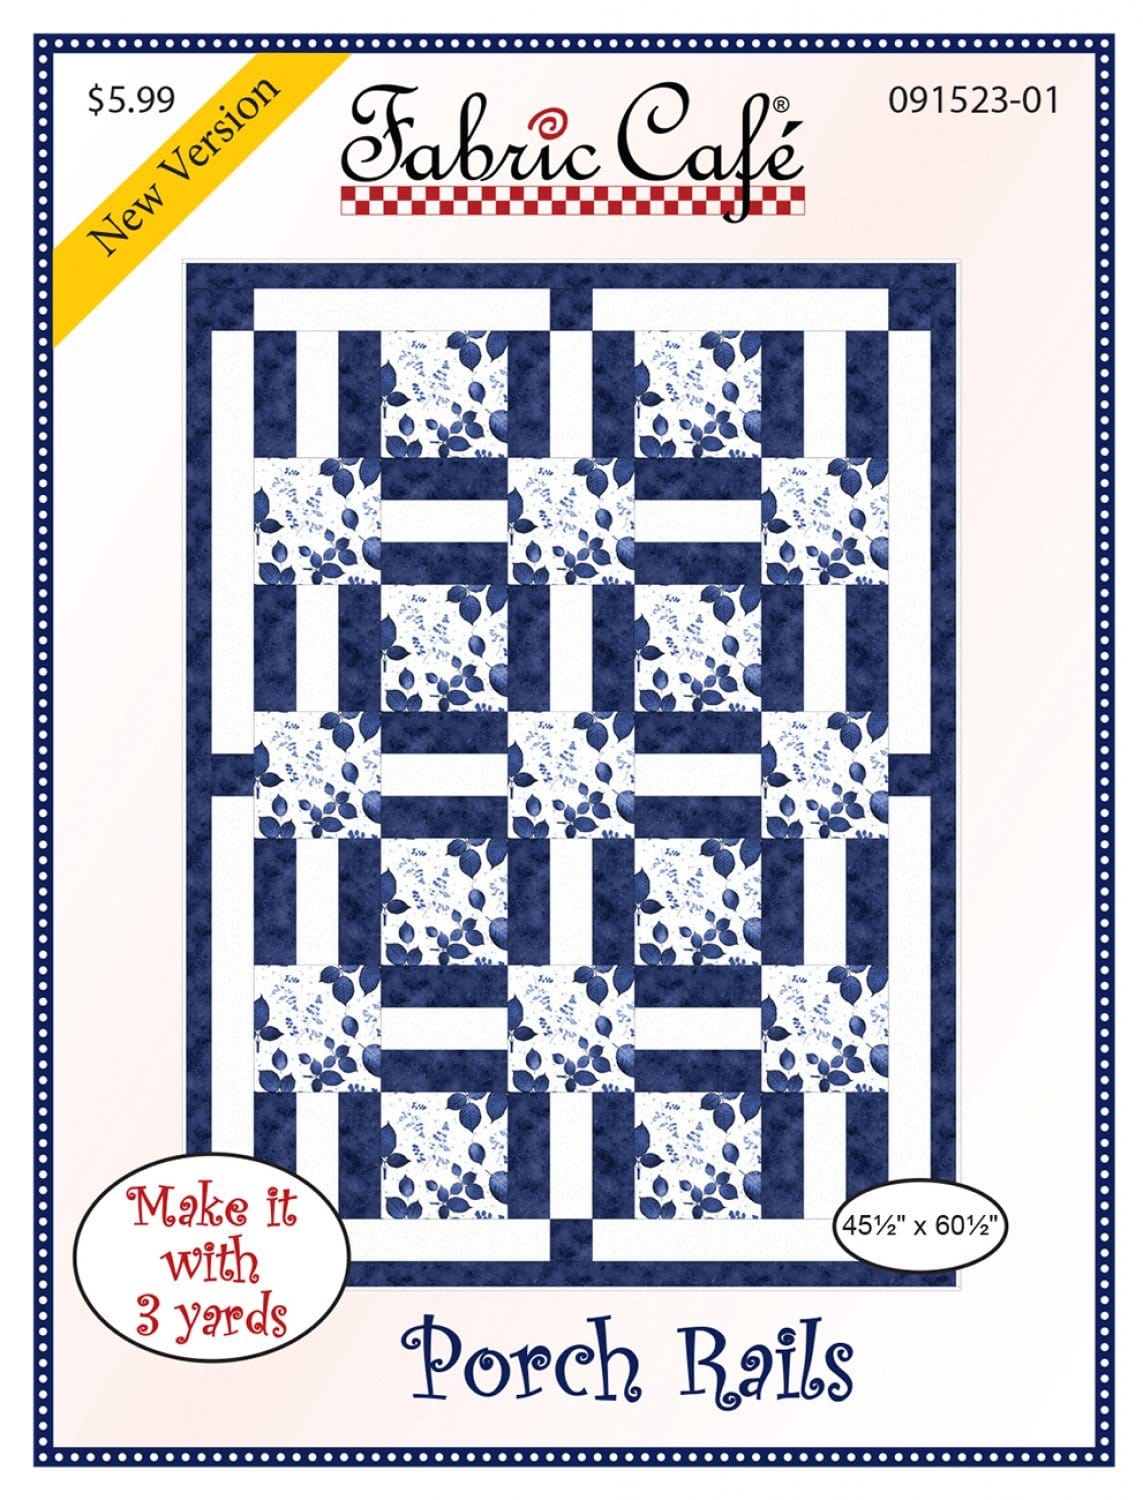 Fabric Cafe - Easy Street / 3 yard quilt pattern - 850029306320